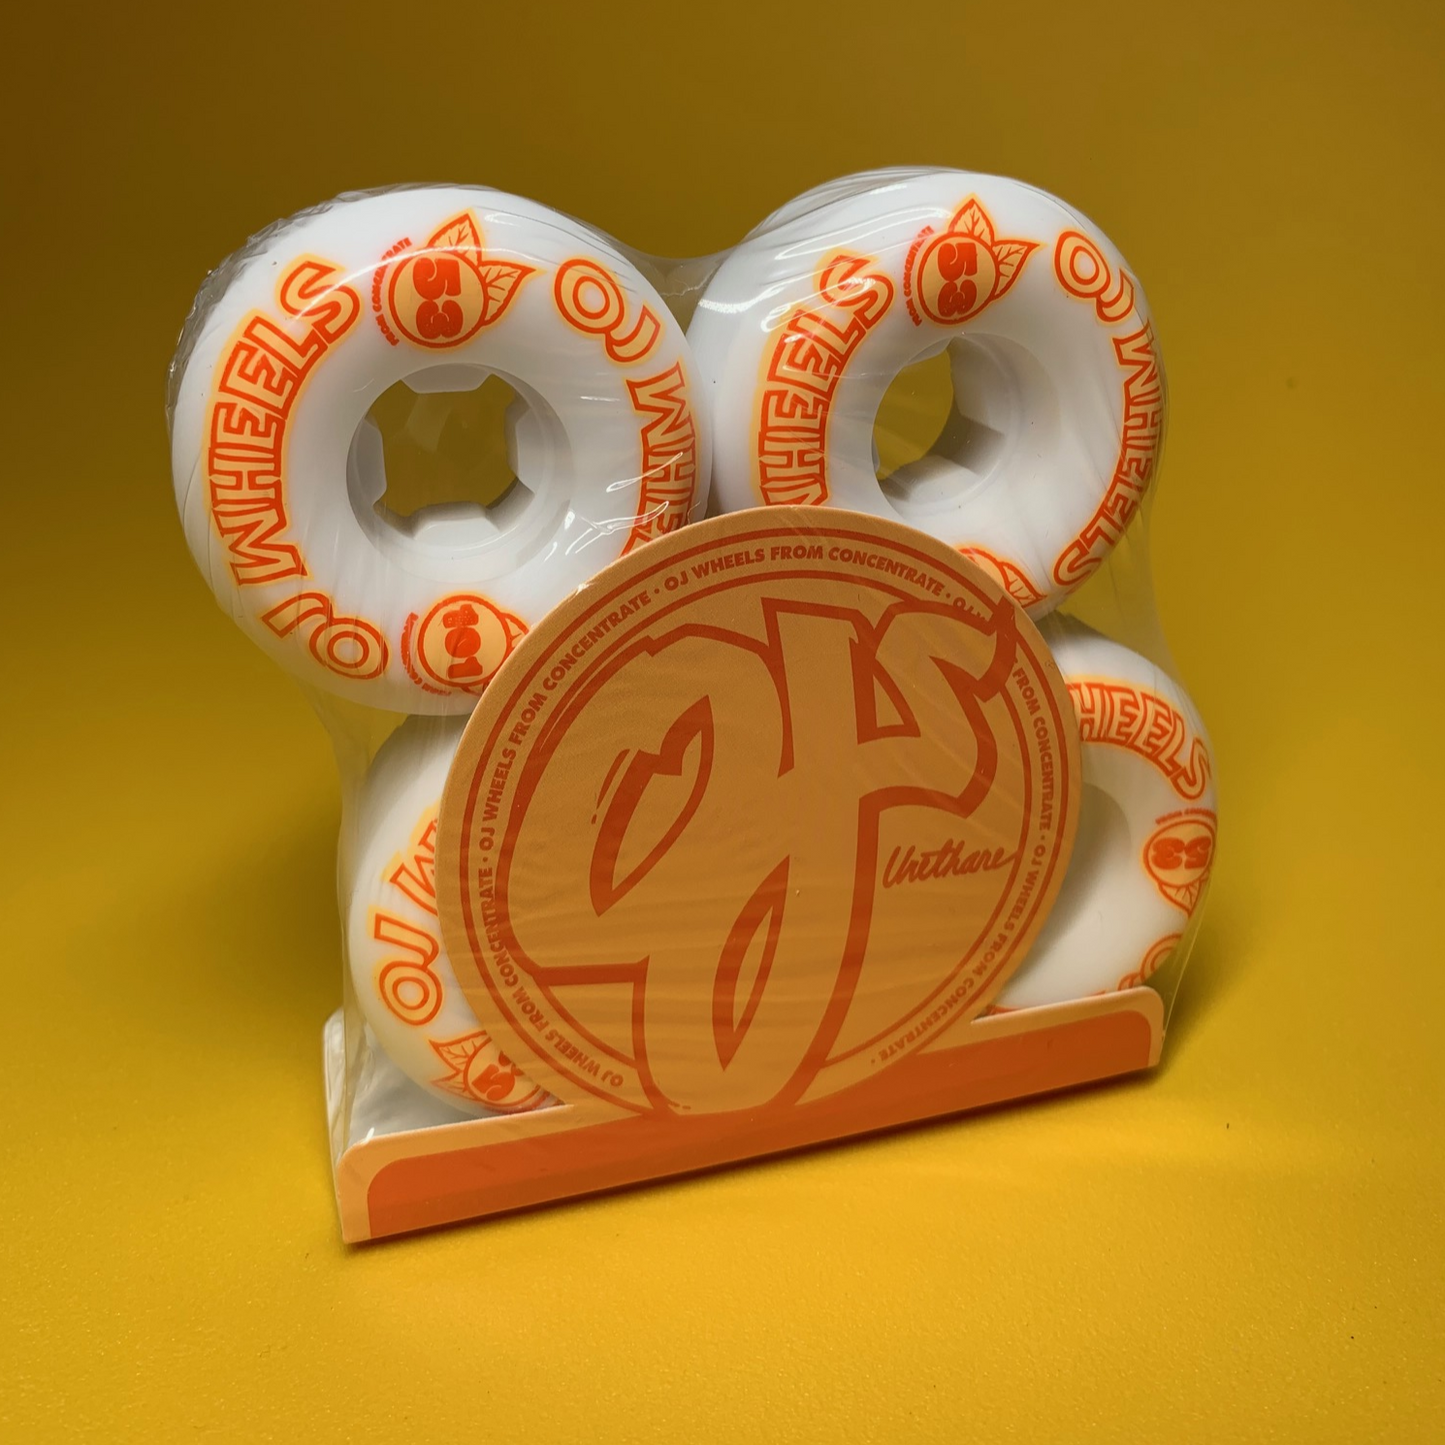  	OJ Wheels From Concentrate Hardline 101a White 53 MM